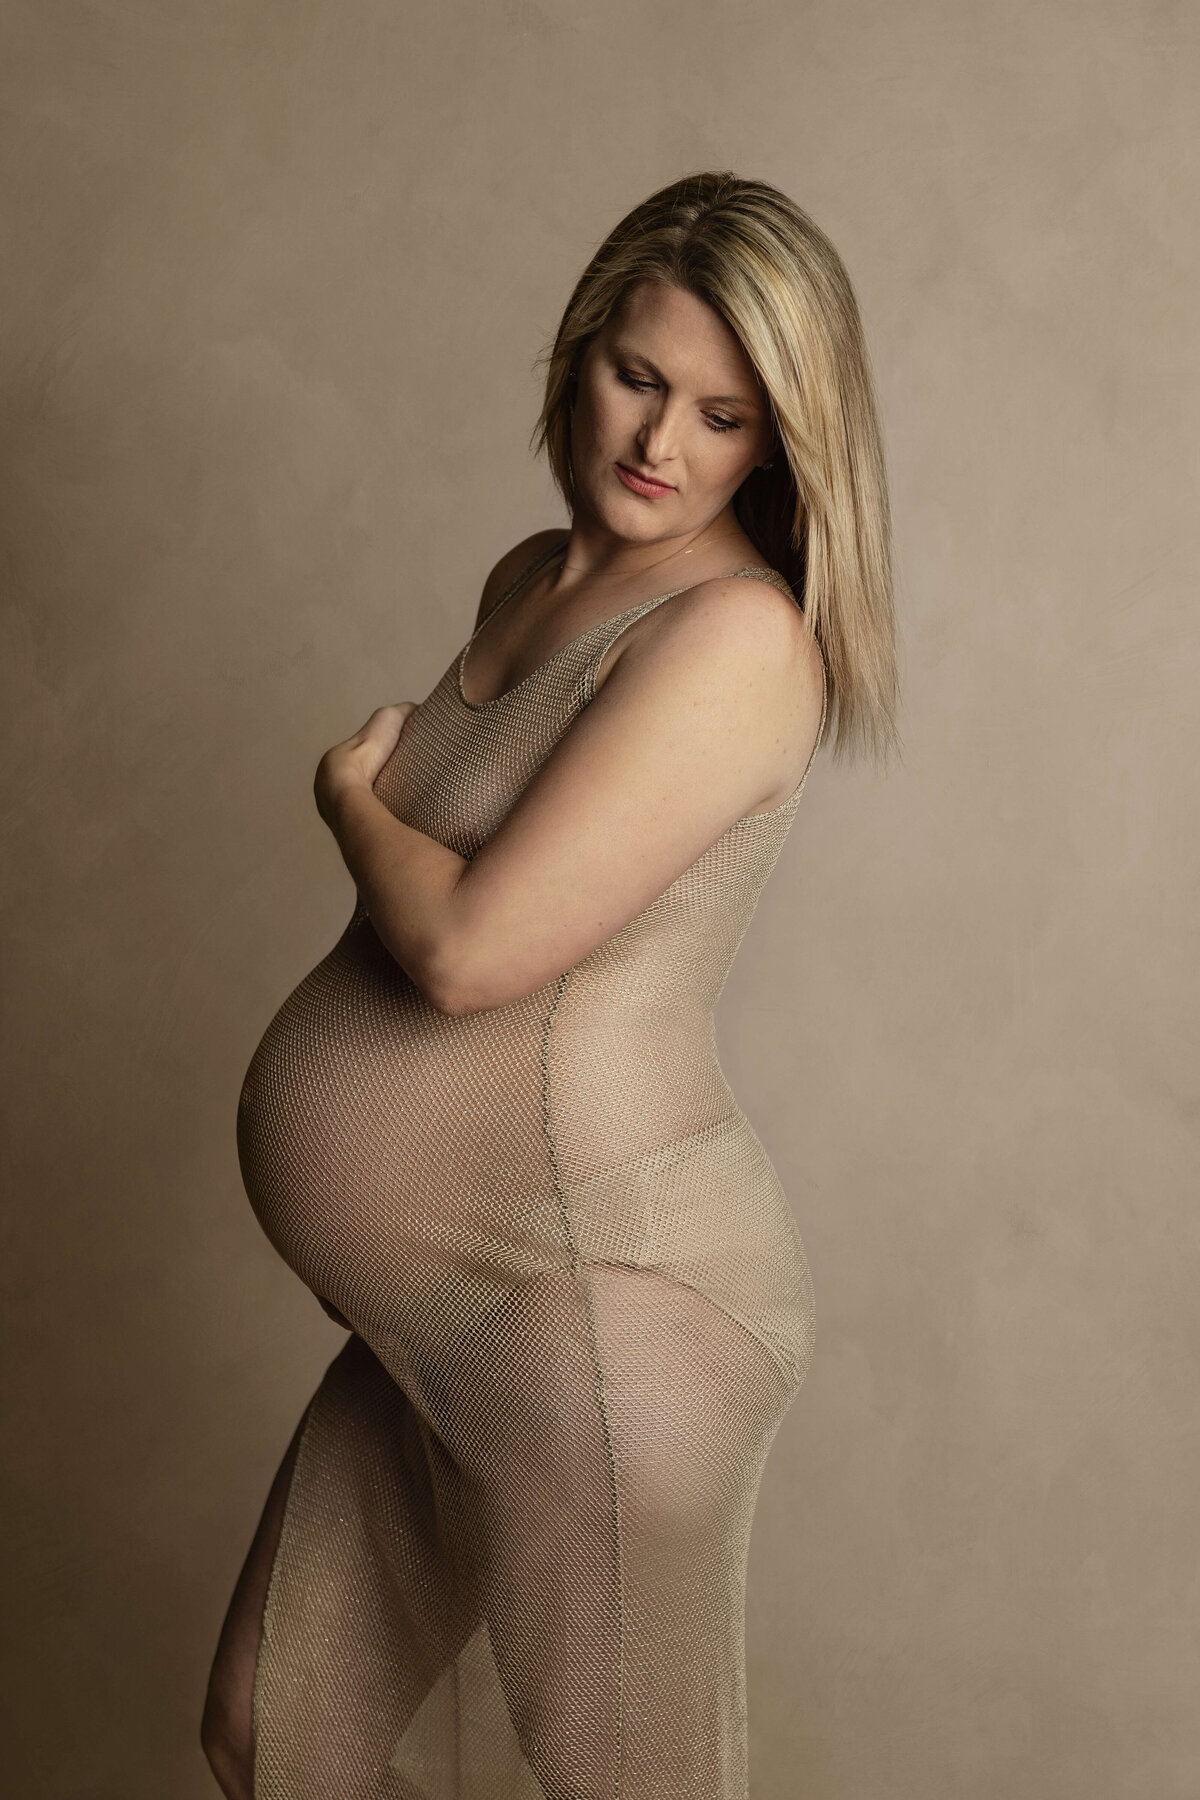 A blonde pregnant woman stands in a studio wearing a see through slip